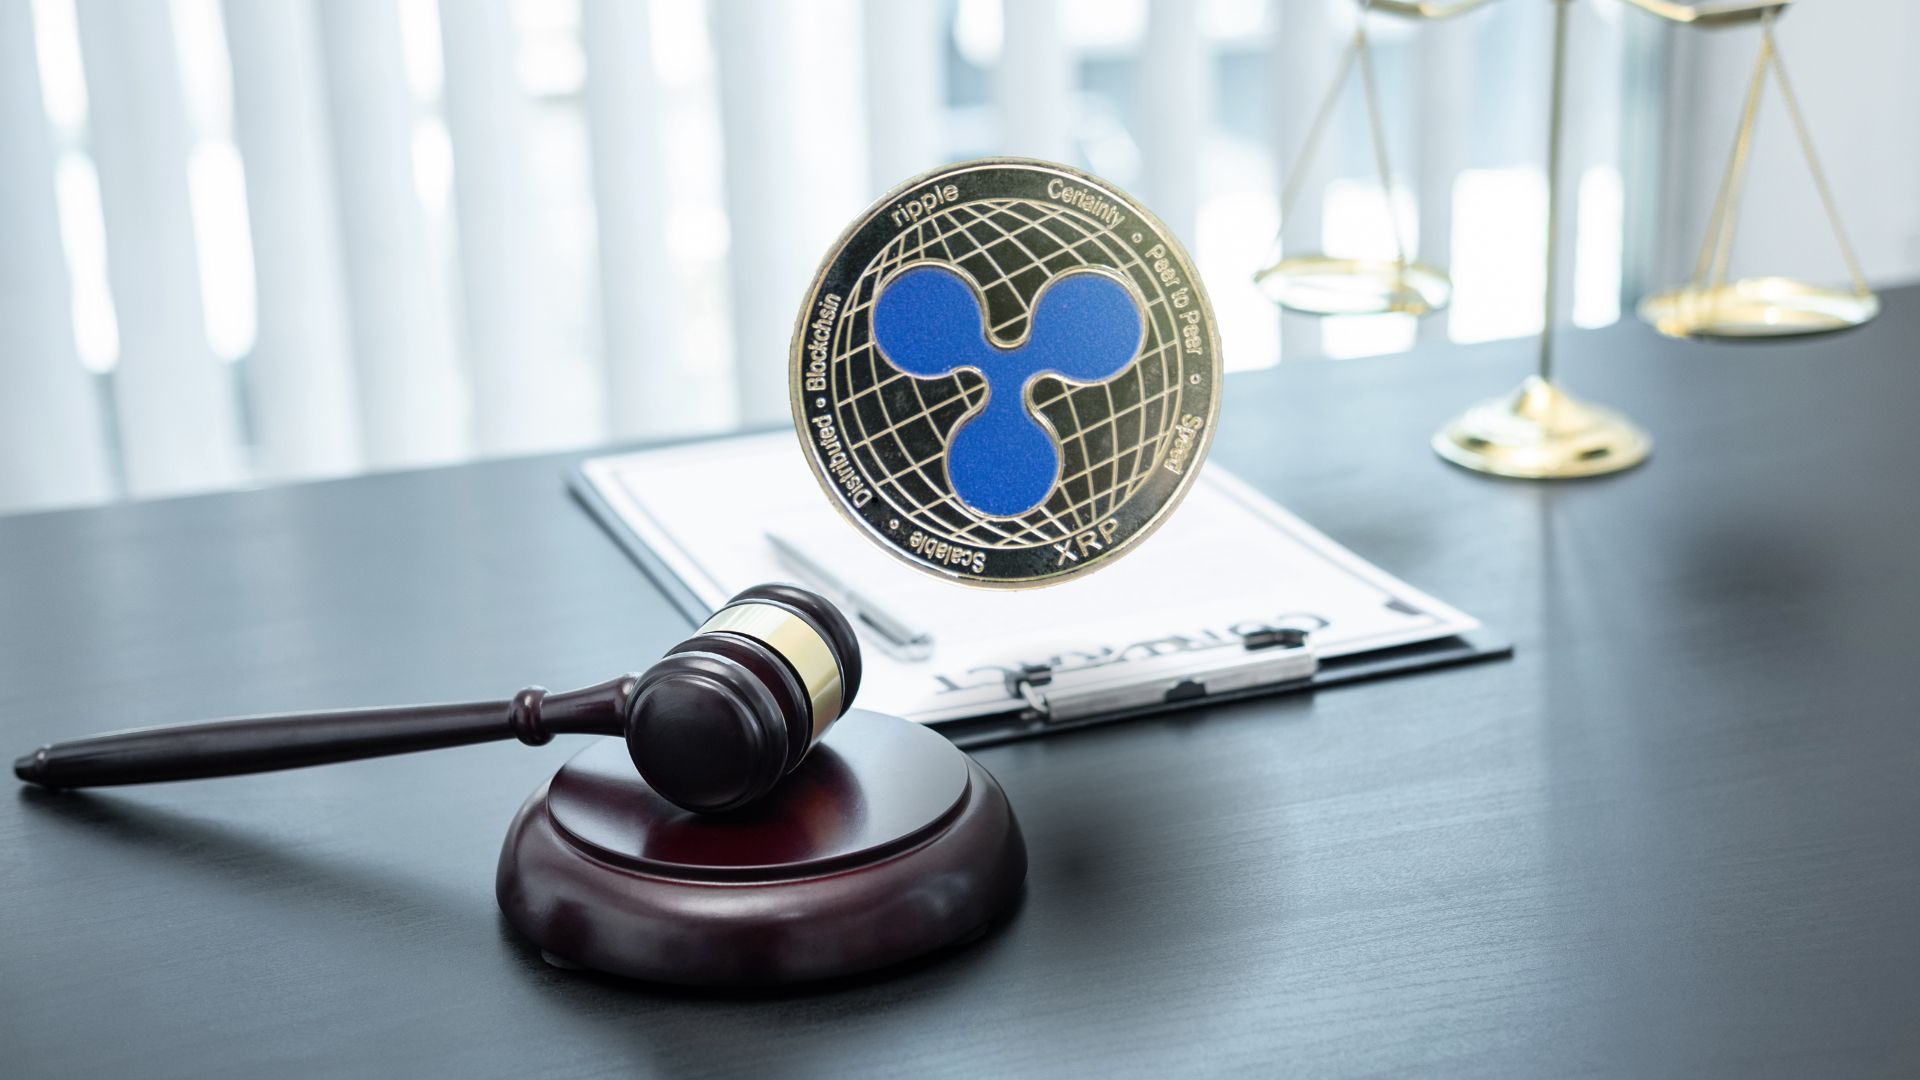 Premature Celebration? Legal Expert Warns Of SEC's 'Calculated Legal  Tactic' In Ripple-XRP Lawsuit ⋆ ZyCrypto